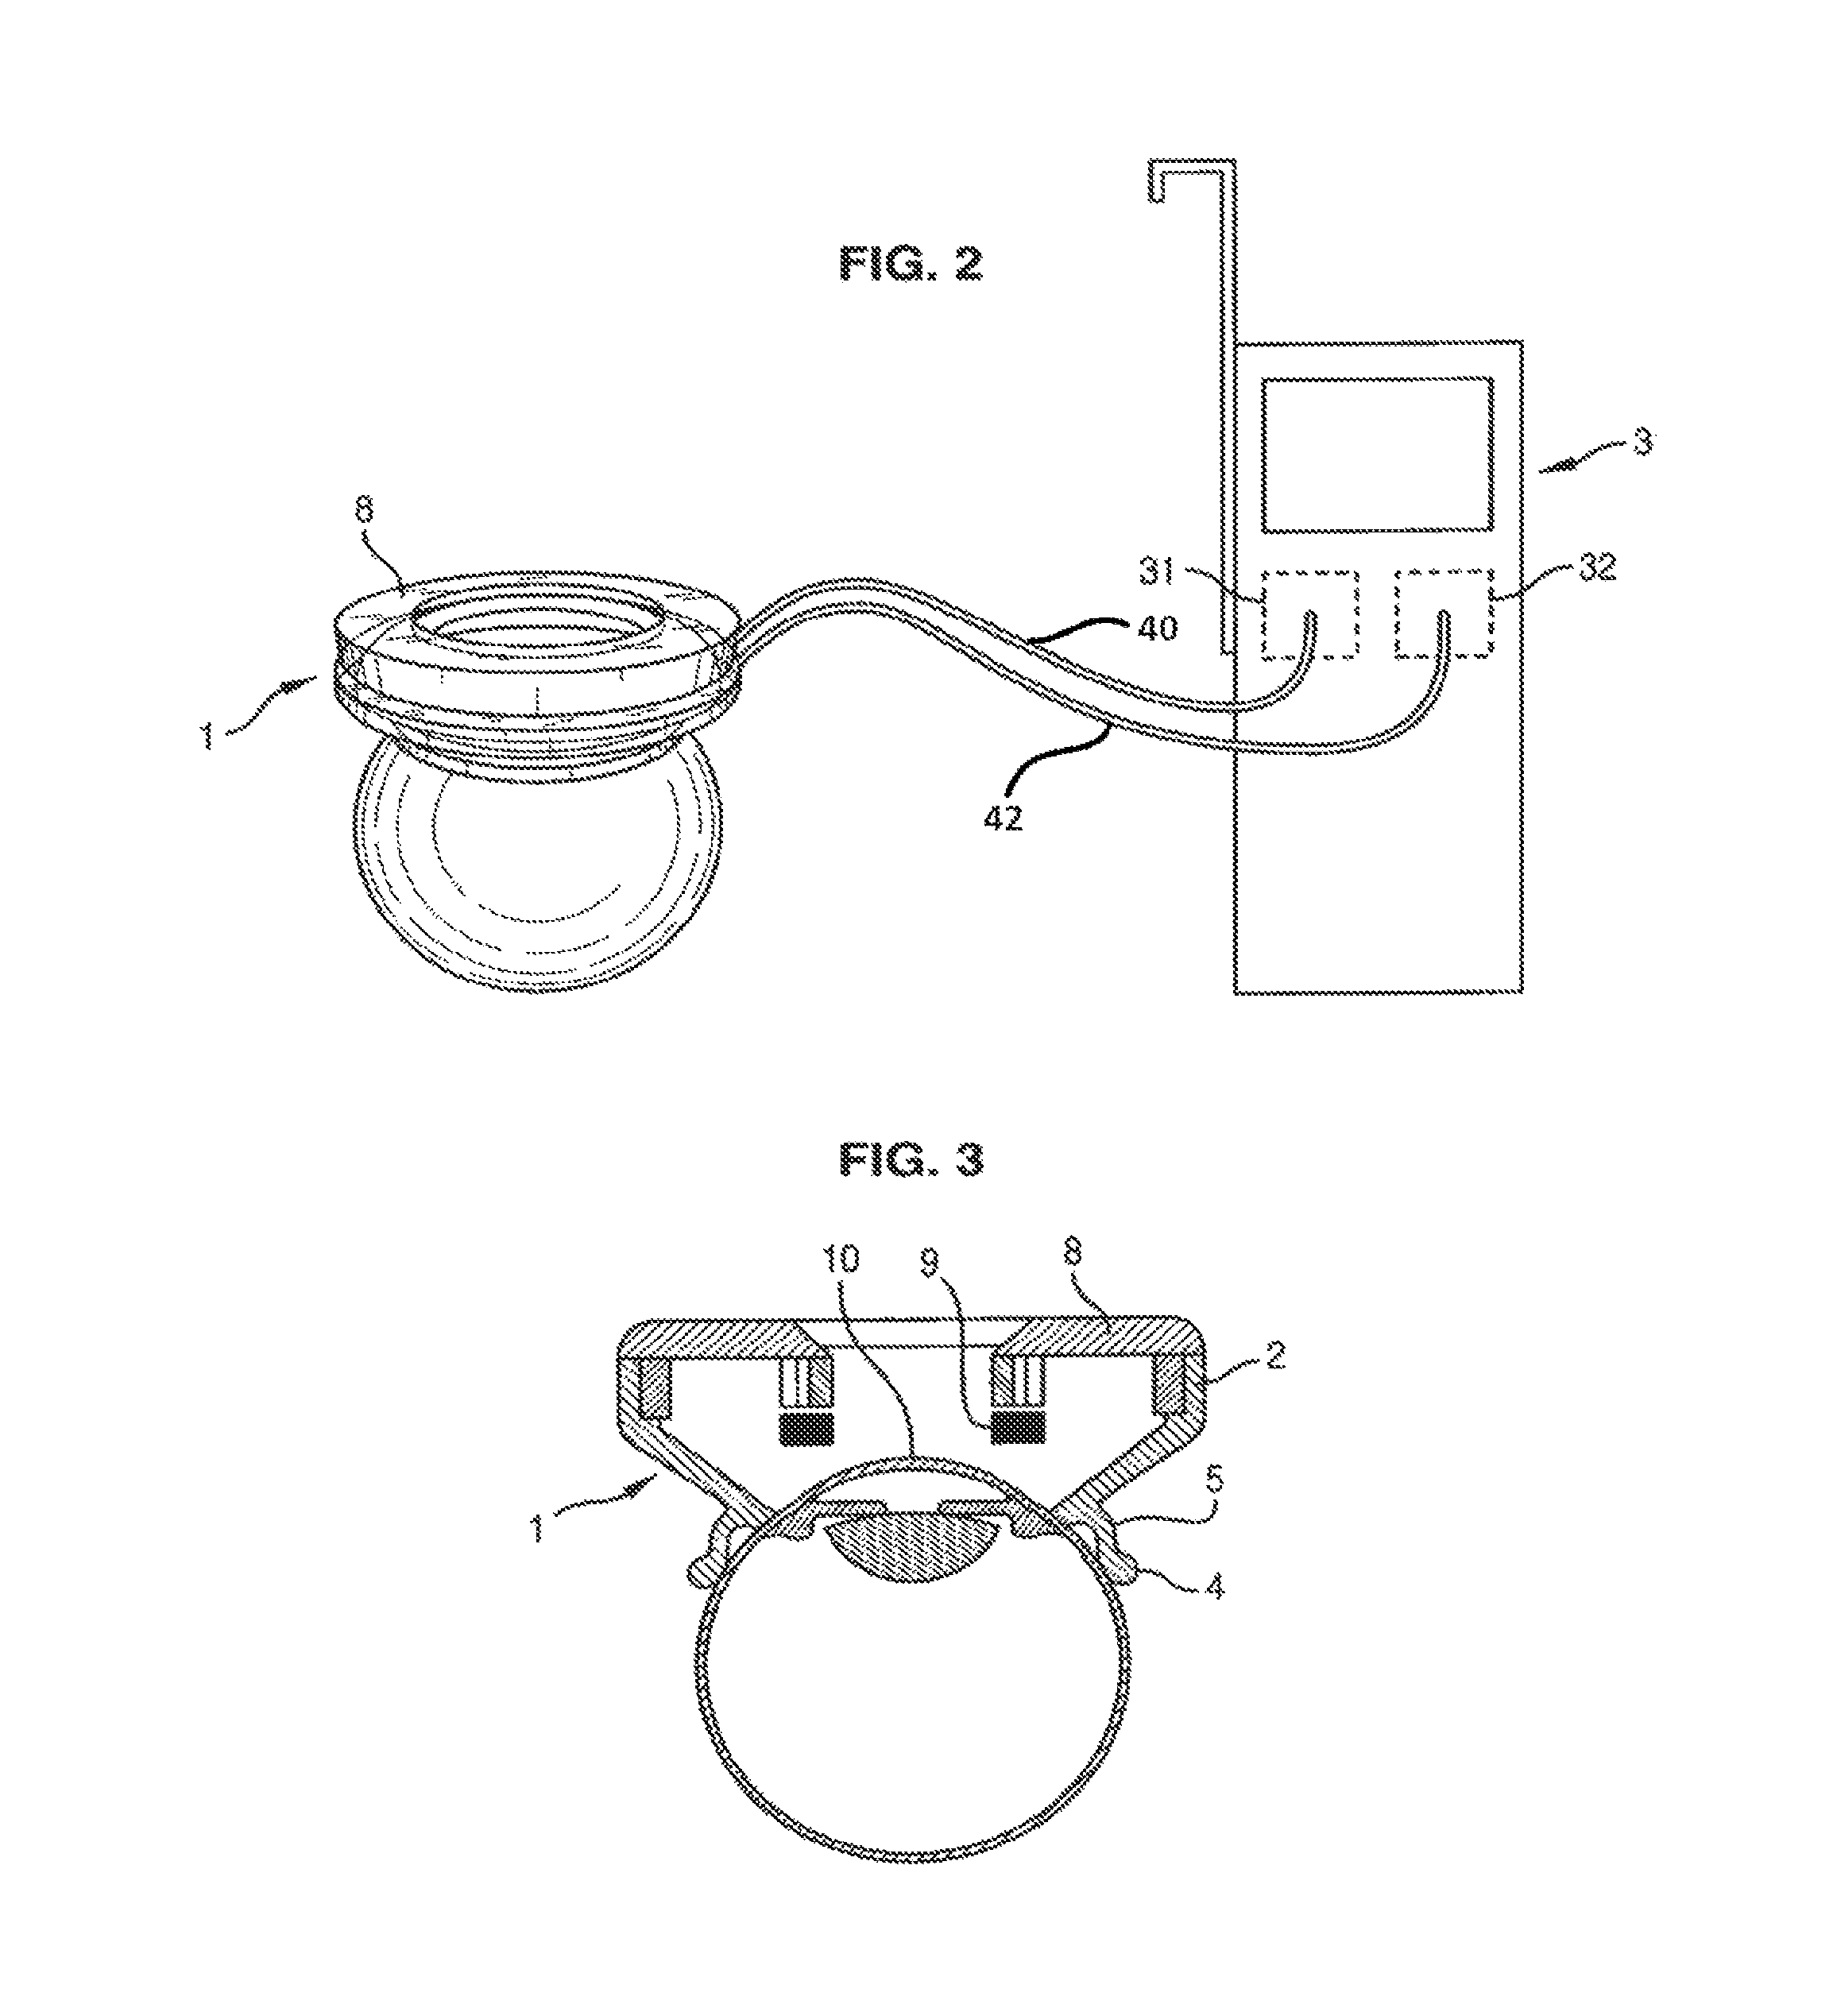 Method of treating an ocular pathology by applying ultrasound to the trabecular meshwork and device thereof